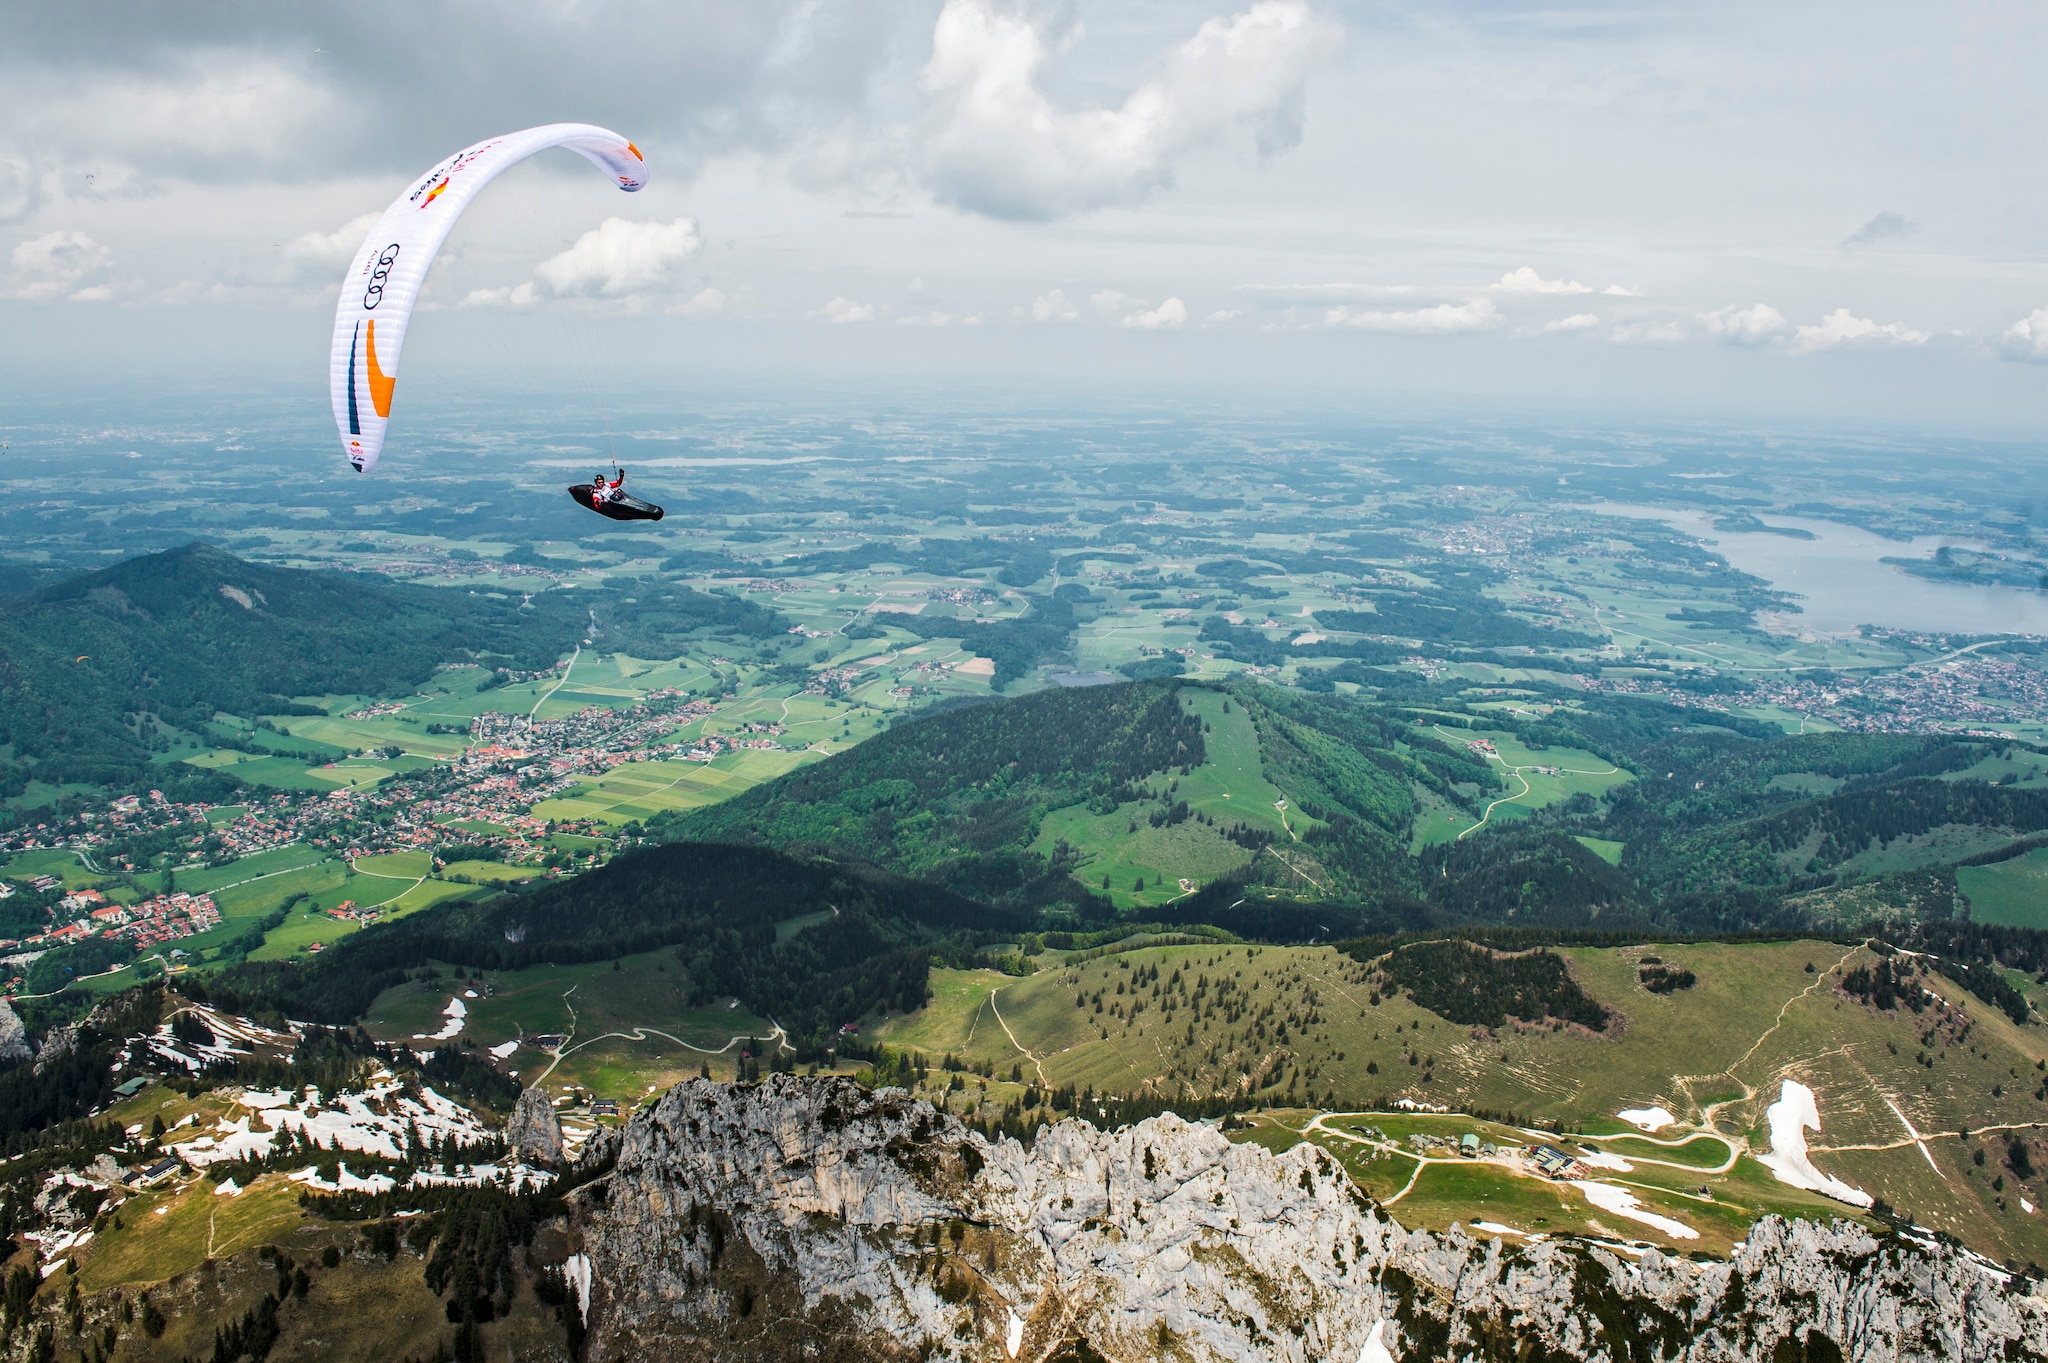 Participant flies during the Red Bull X-Alps preparations in Aschau, Germany on may 25, 2019